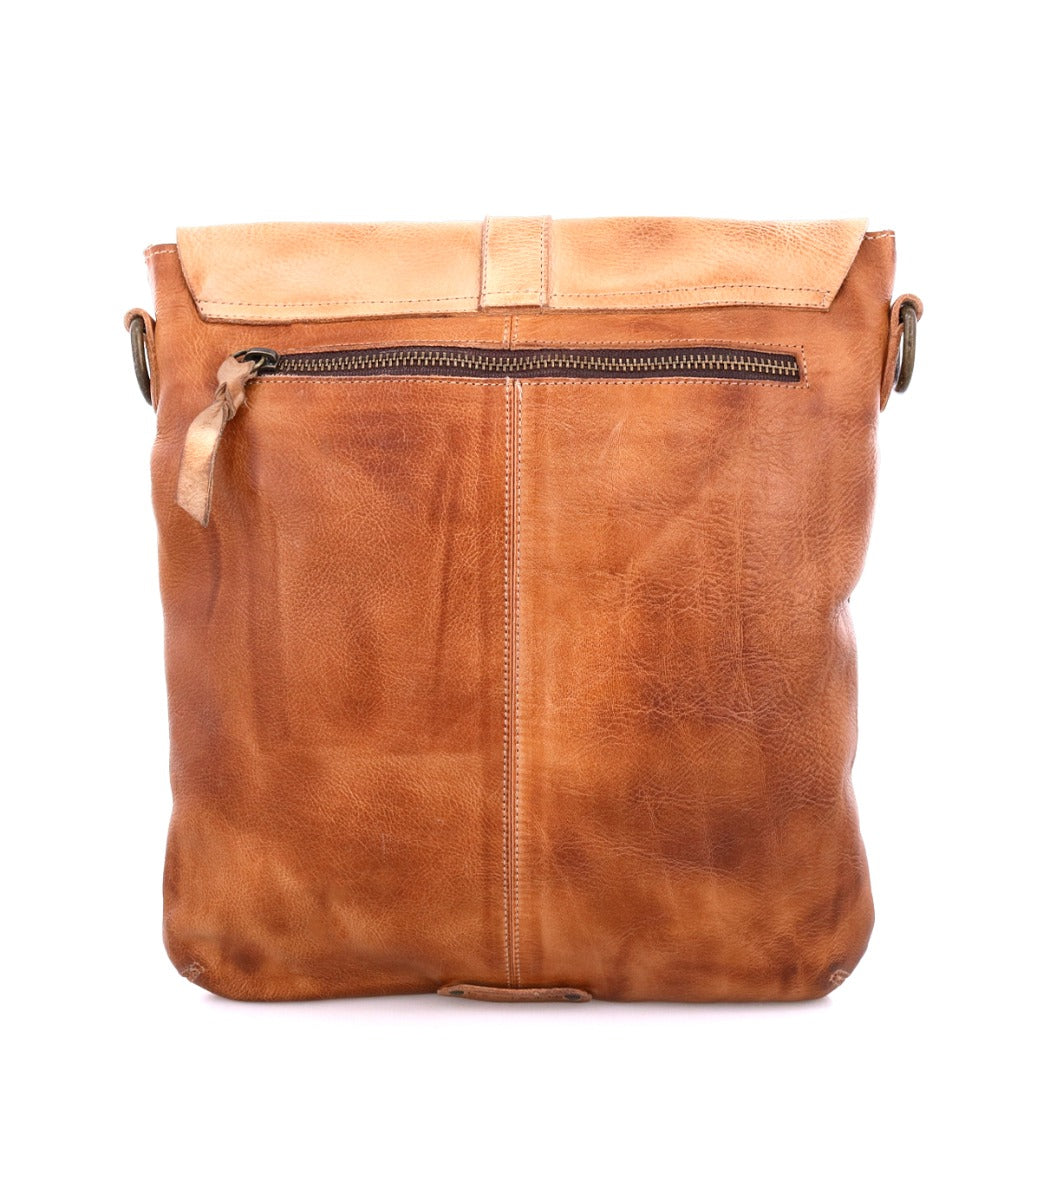 The Jack leather crossbody bag by Bed Stu.